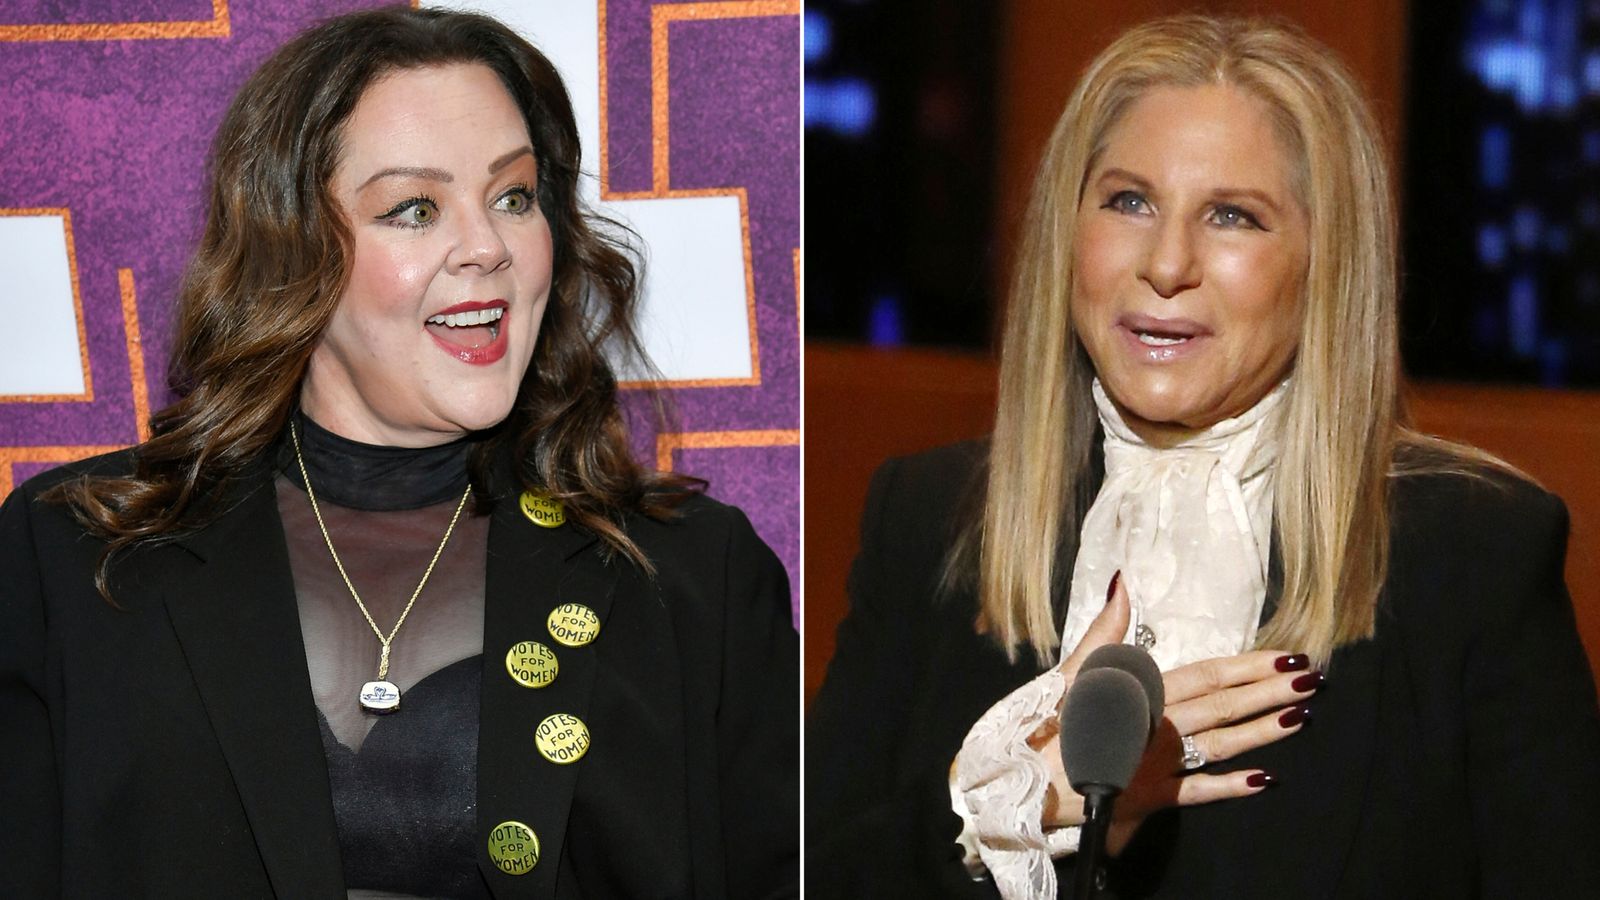 Melissa McCarthy responds to Barbra Streisand's apology after Ozempic comment